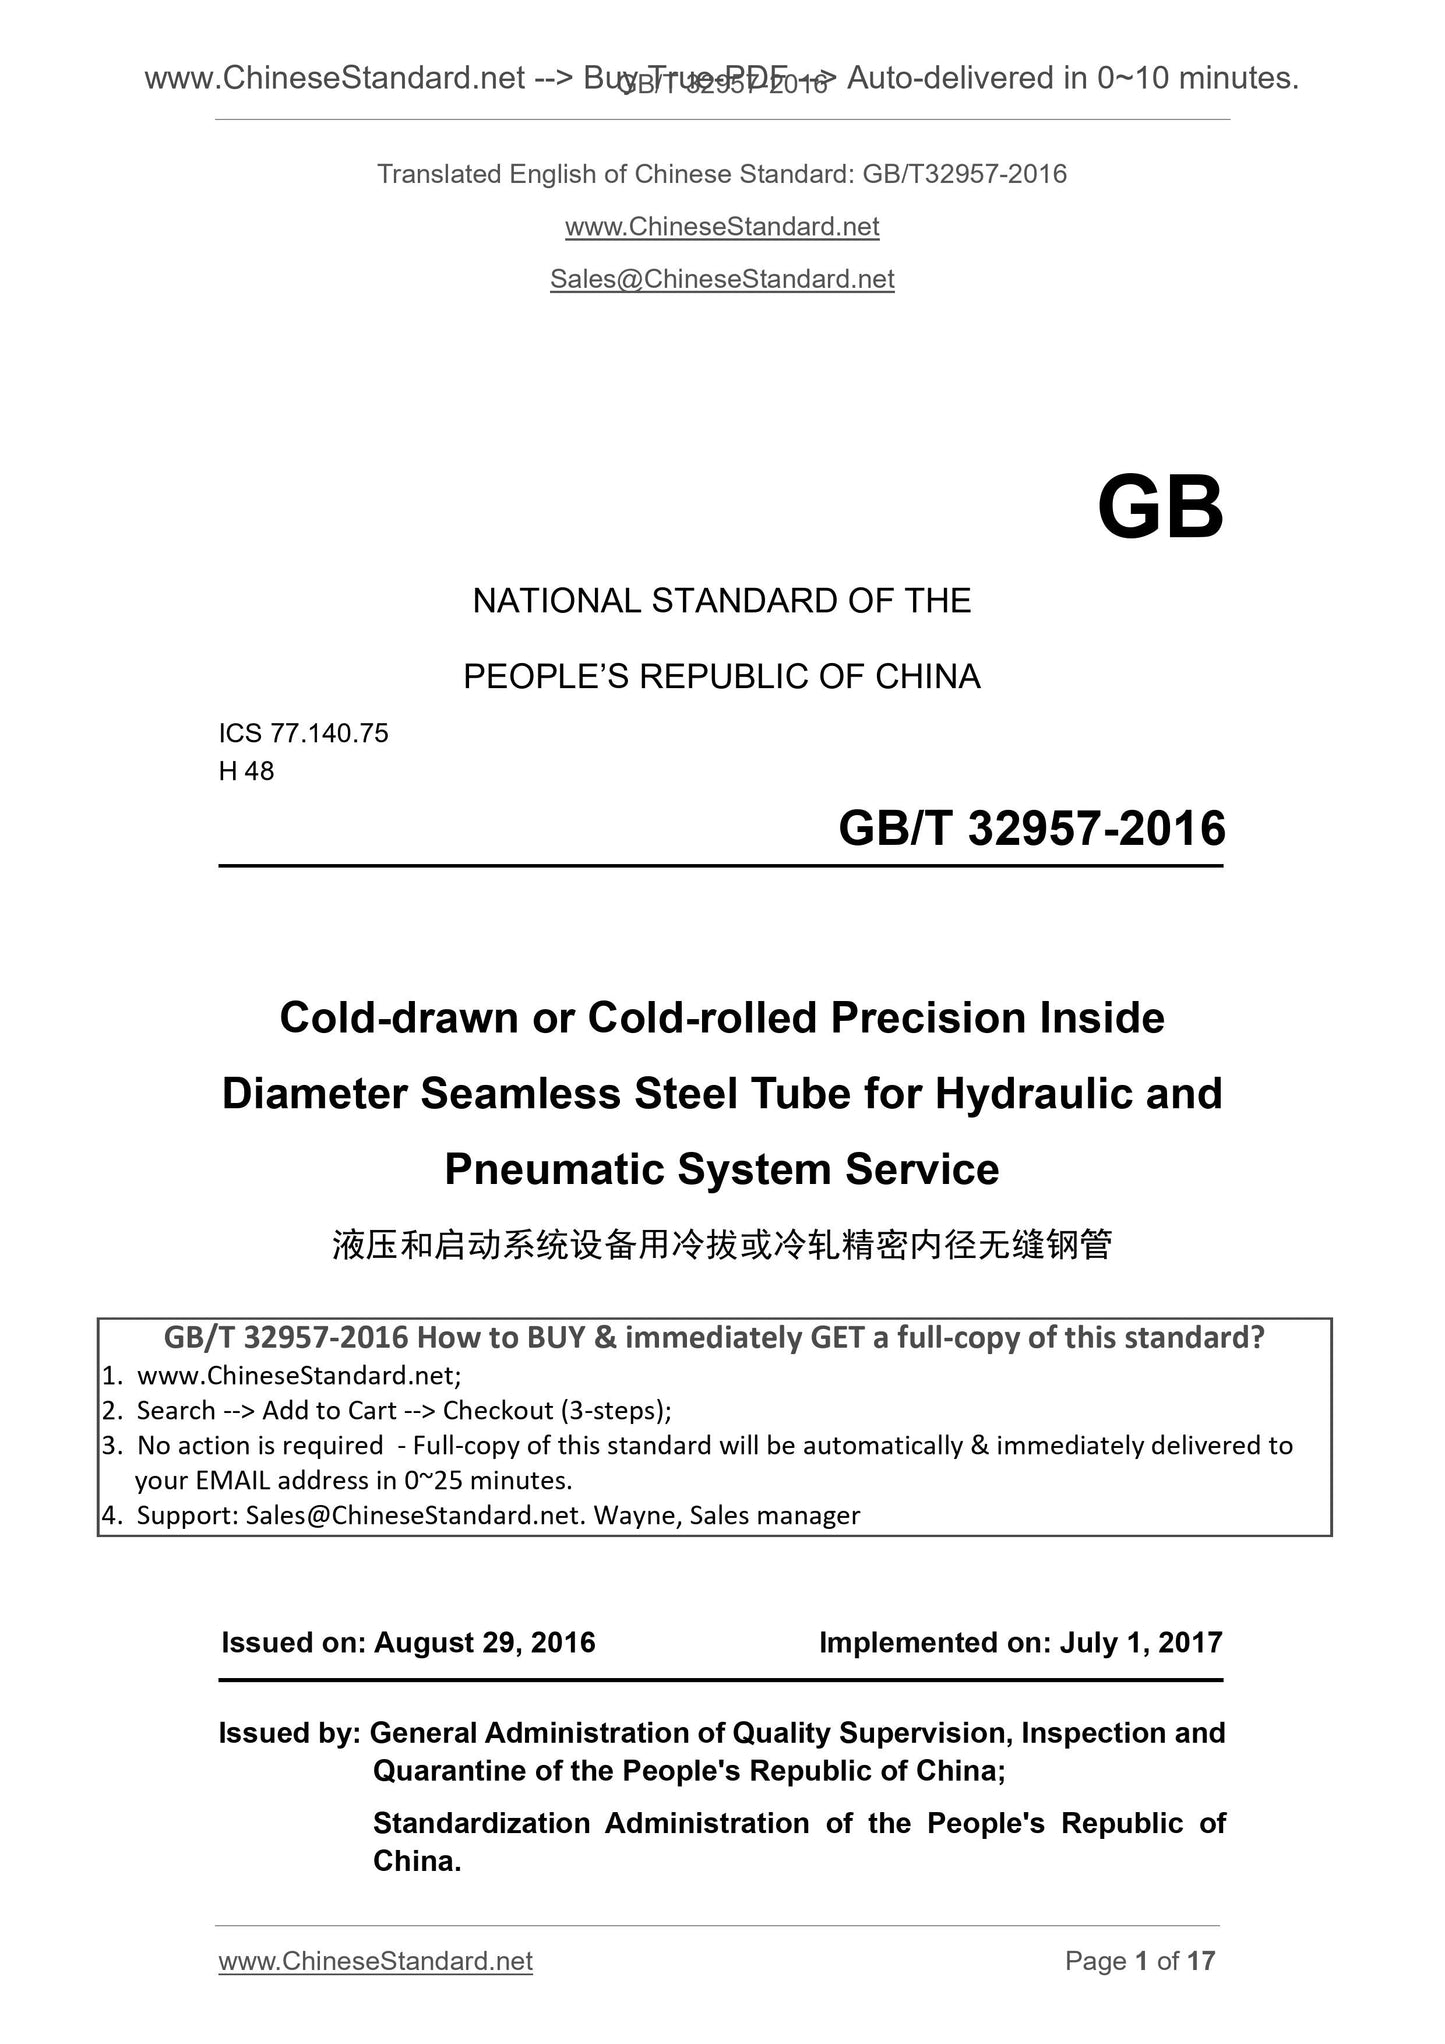 GB/T 32957-2016 Page 1